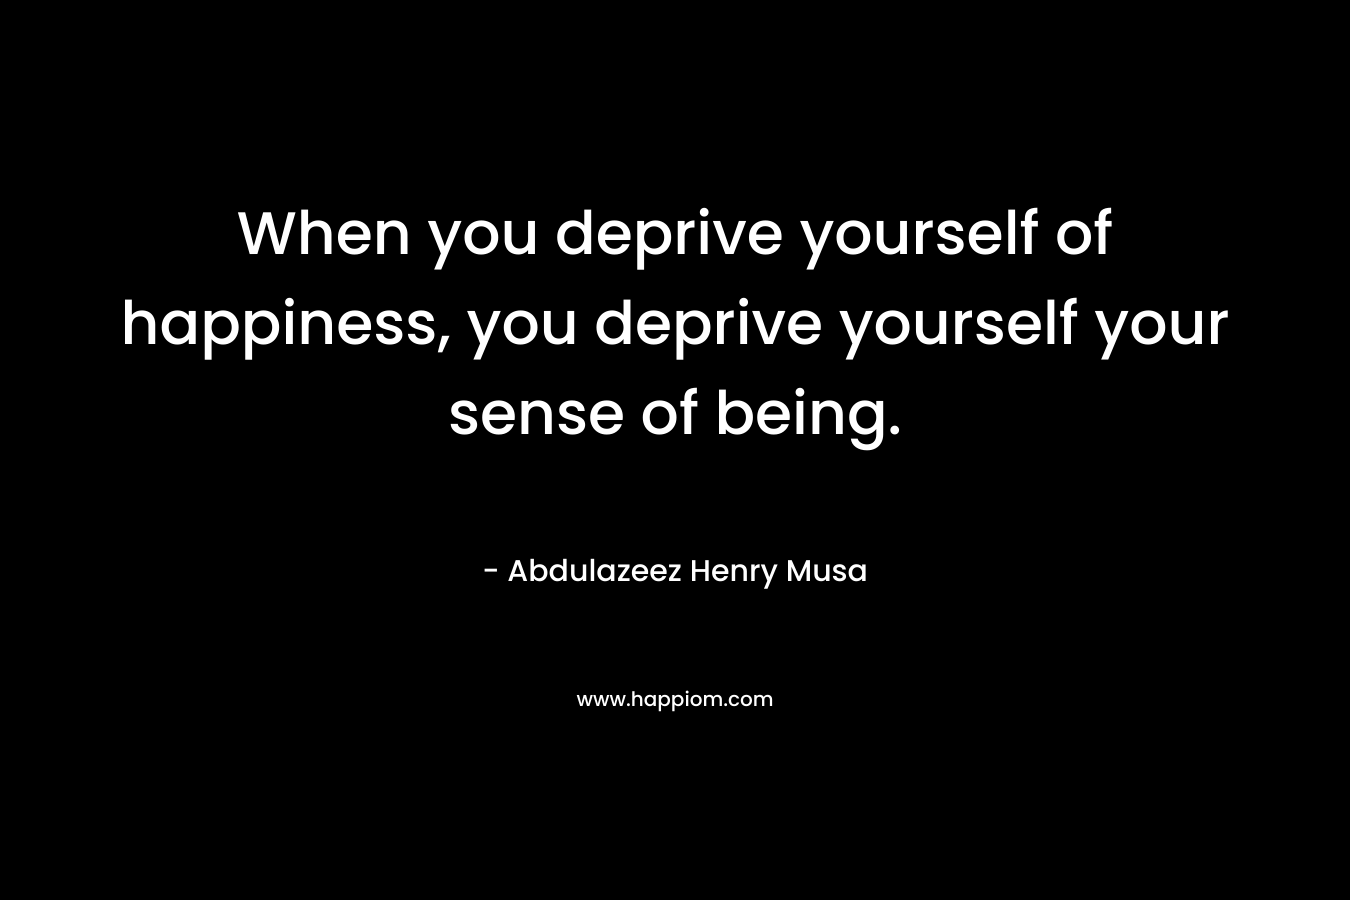 When you deprive yourself of happiness, you deprive yourself your sense of being.